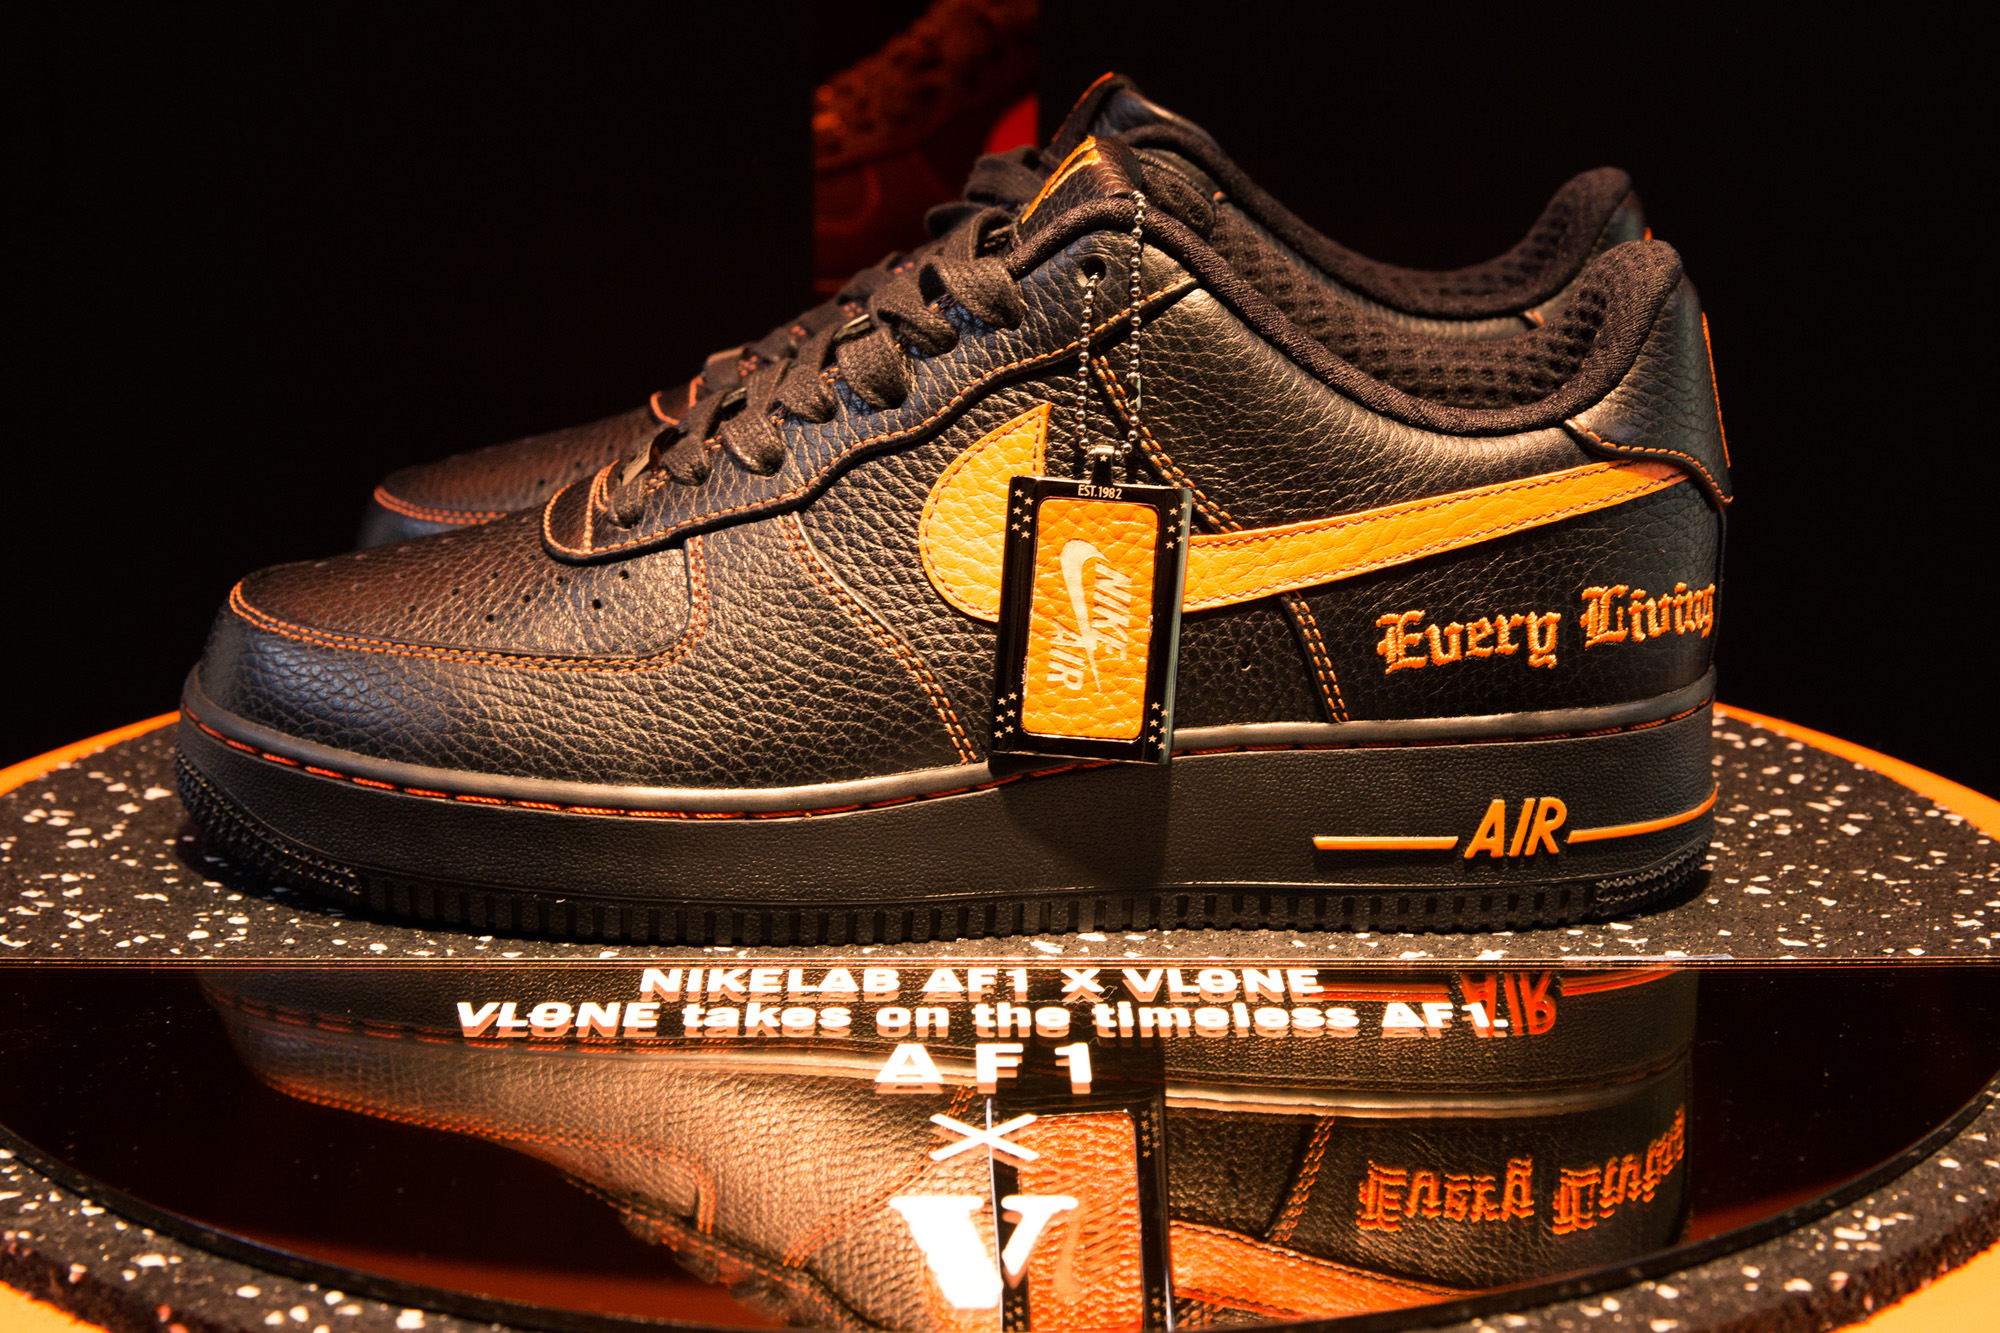 2017 Nike Collaborations Including Riccardo Tisci and VLONE - Coveteur